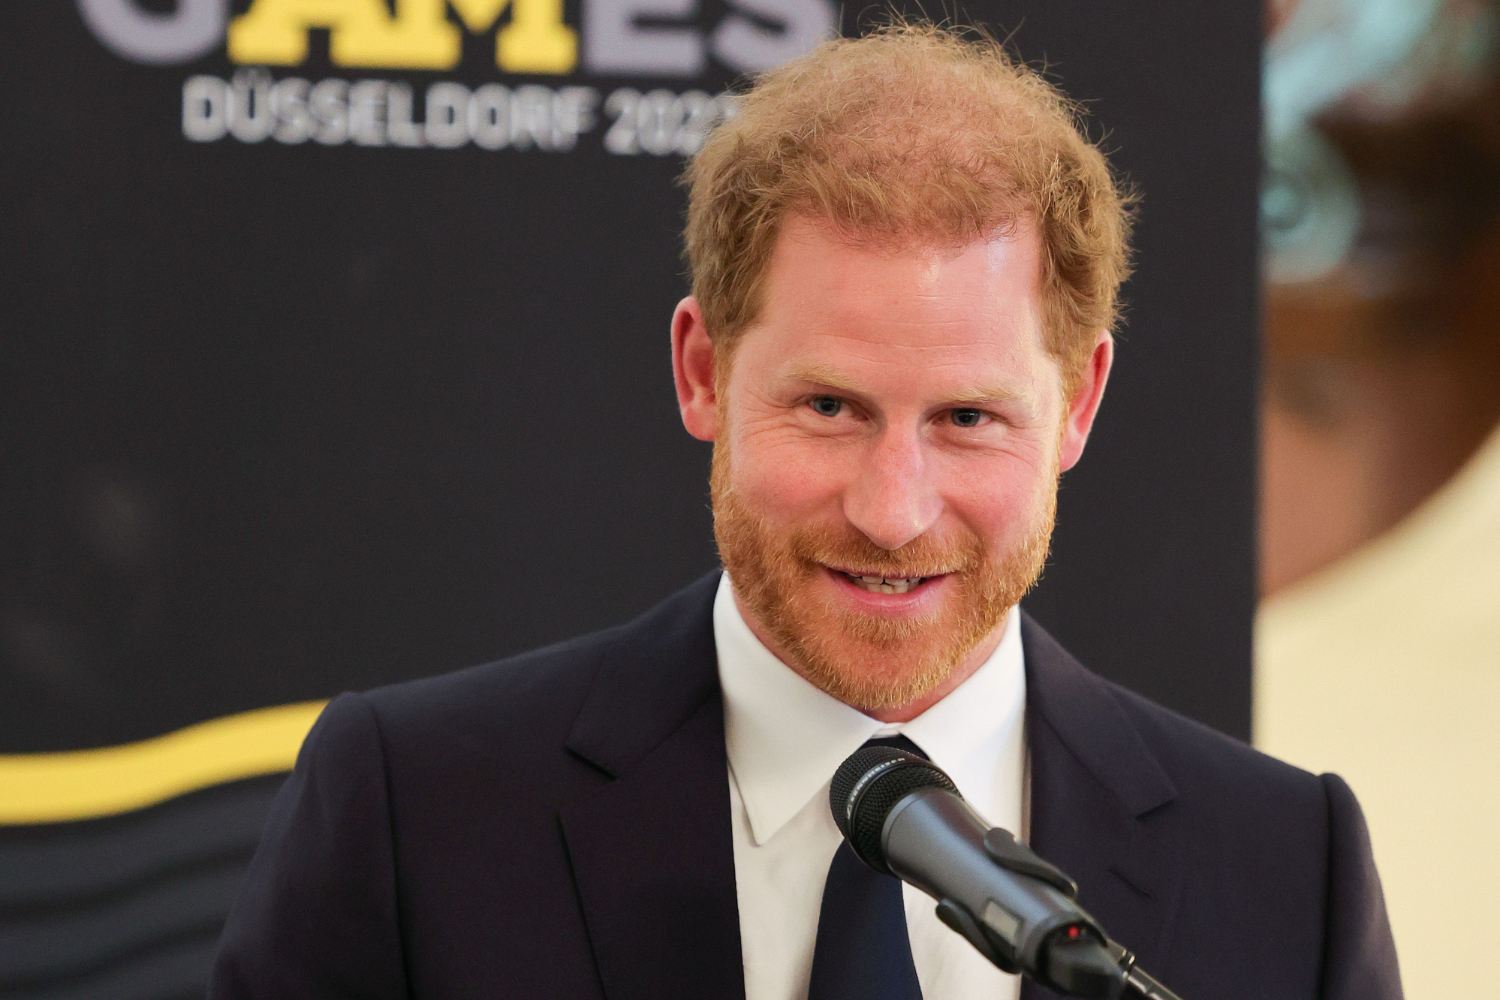 'Heart of Invictus' Shows Prince Harry's Best, but Real Test Is Yet to Come